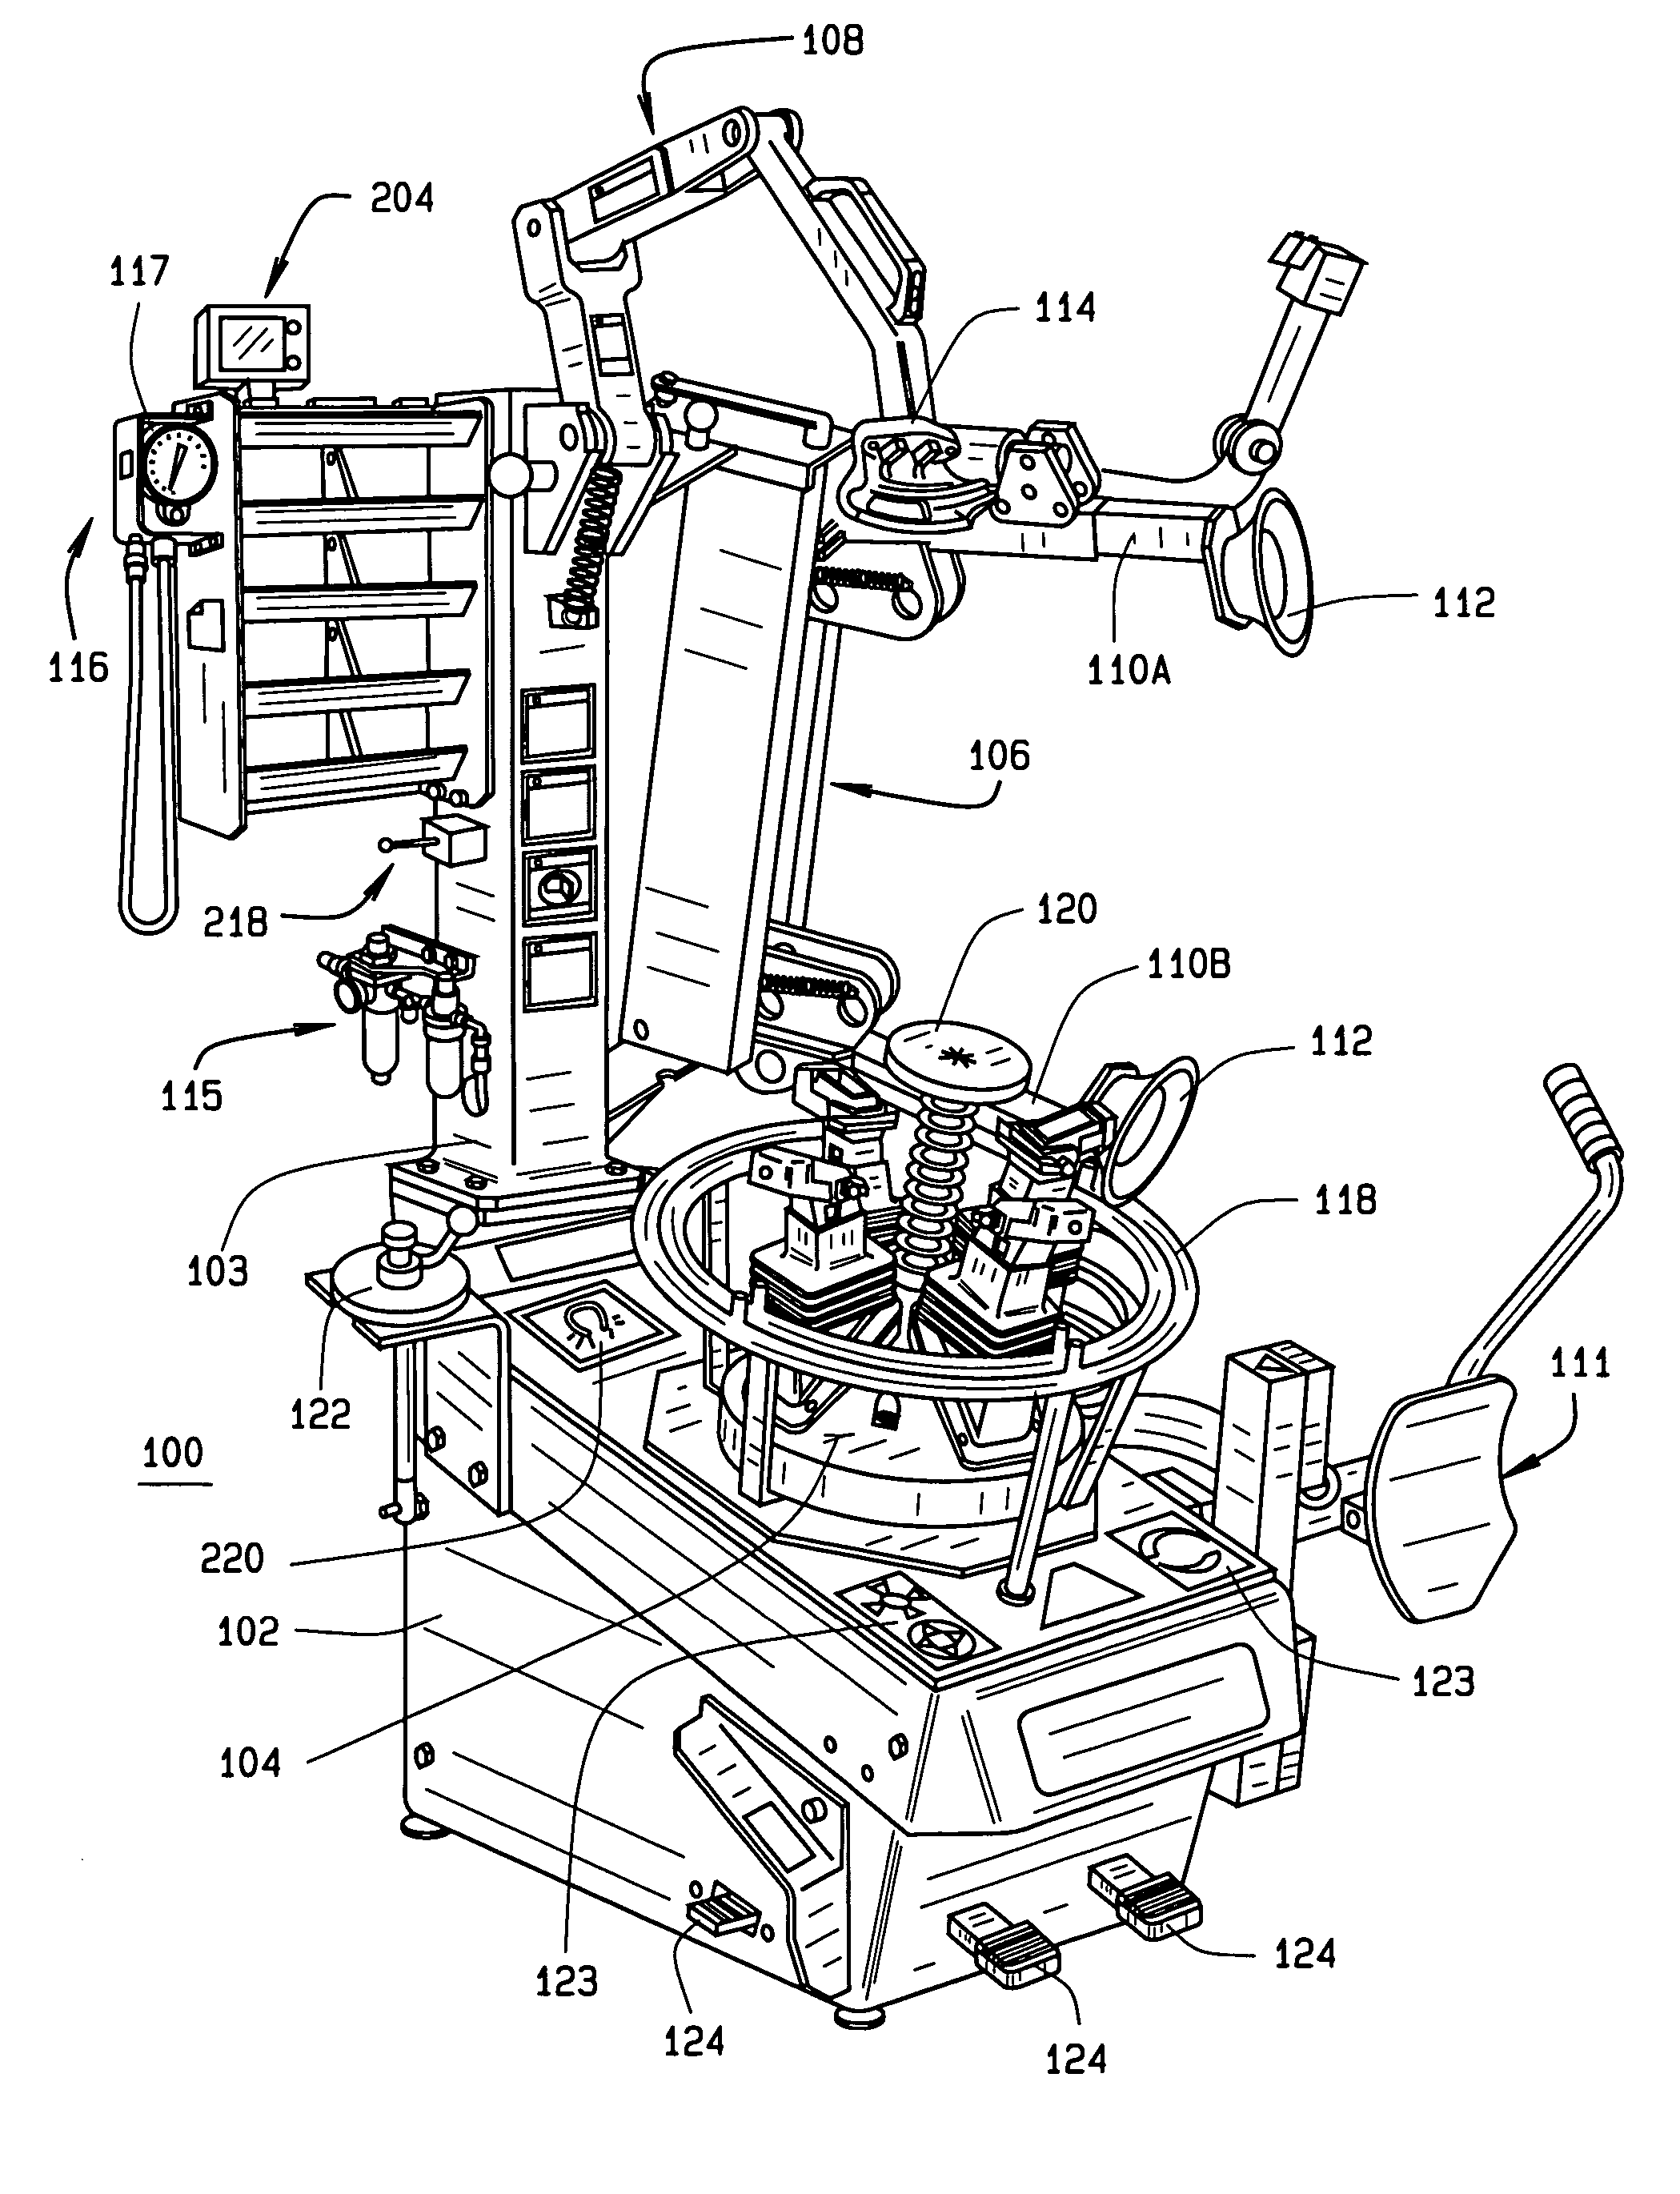 Vehicle tire changer with integrated detector for tire pressure sensors